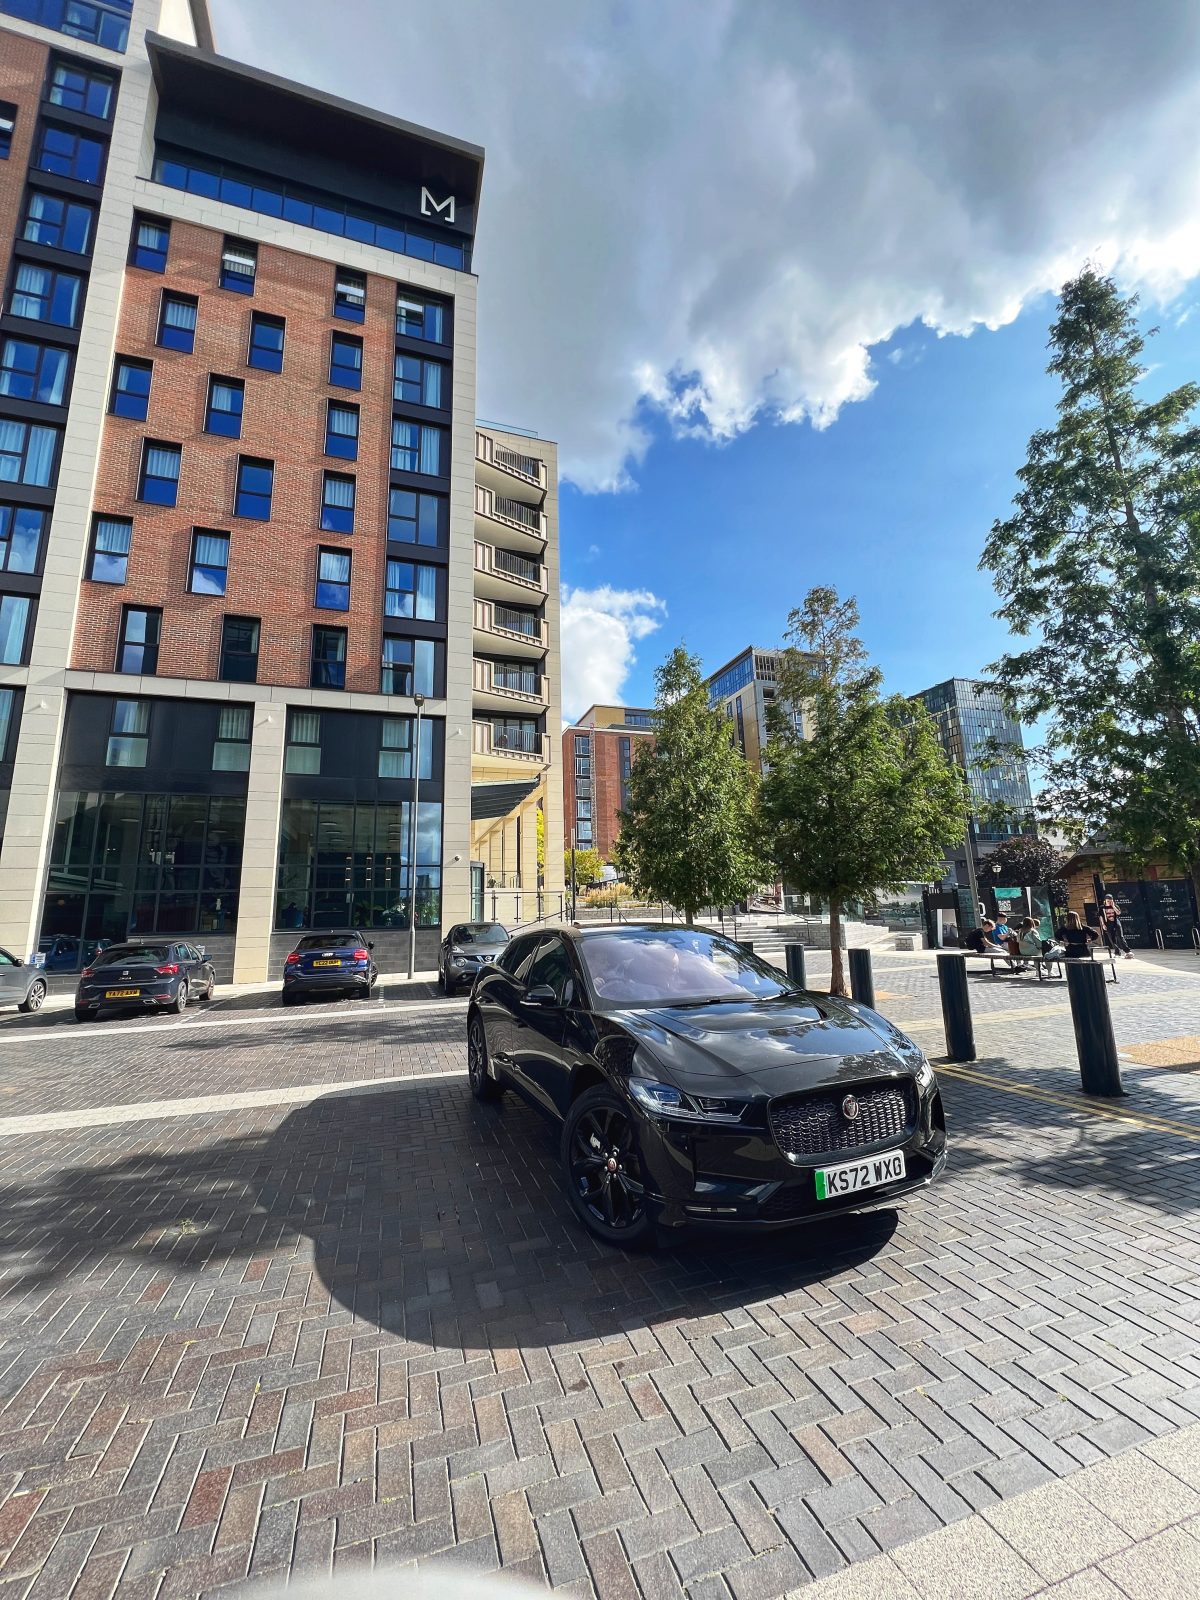 Moda, New York Square in Leeds now has Jaguar I-PACE cars residents can borrow for free